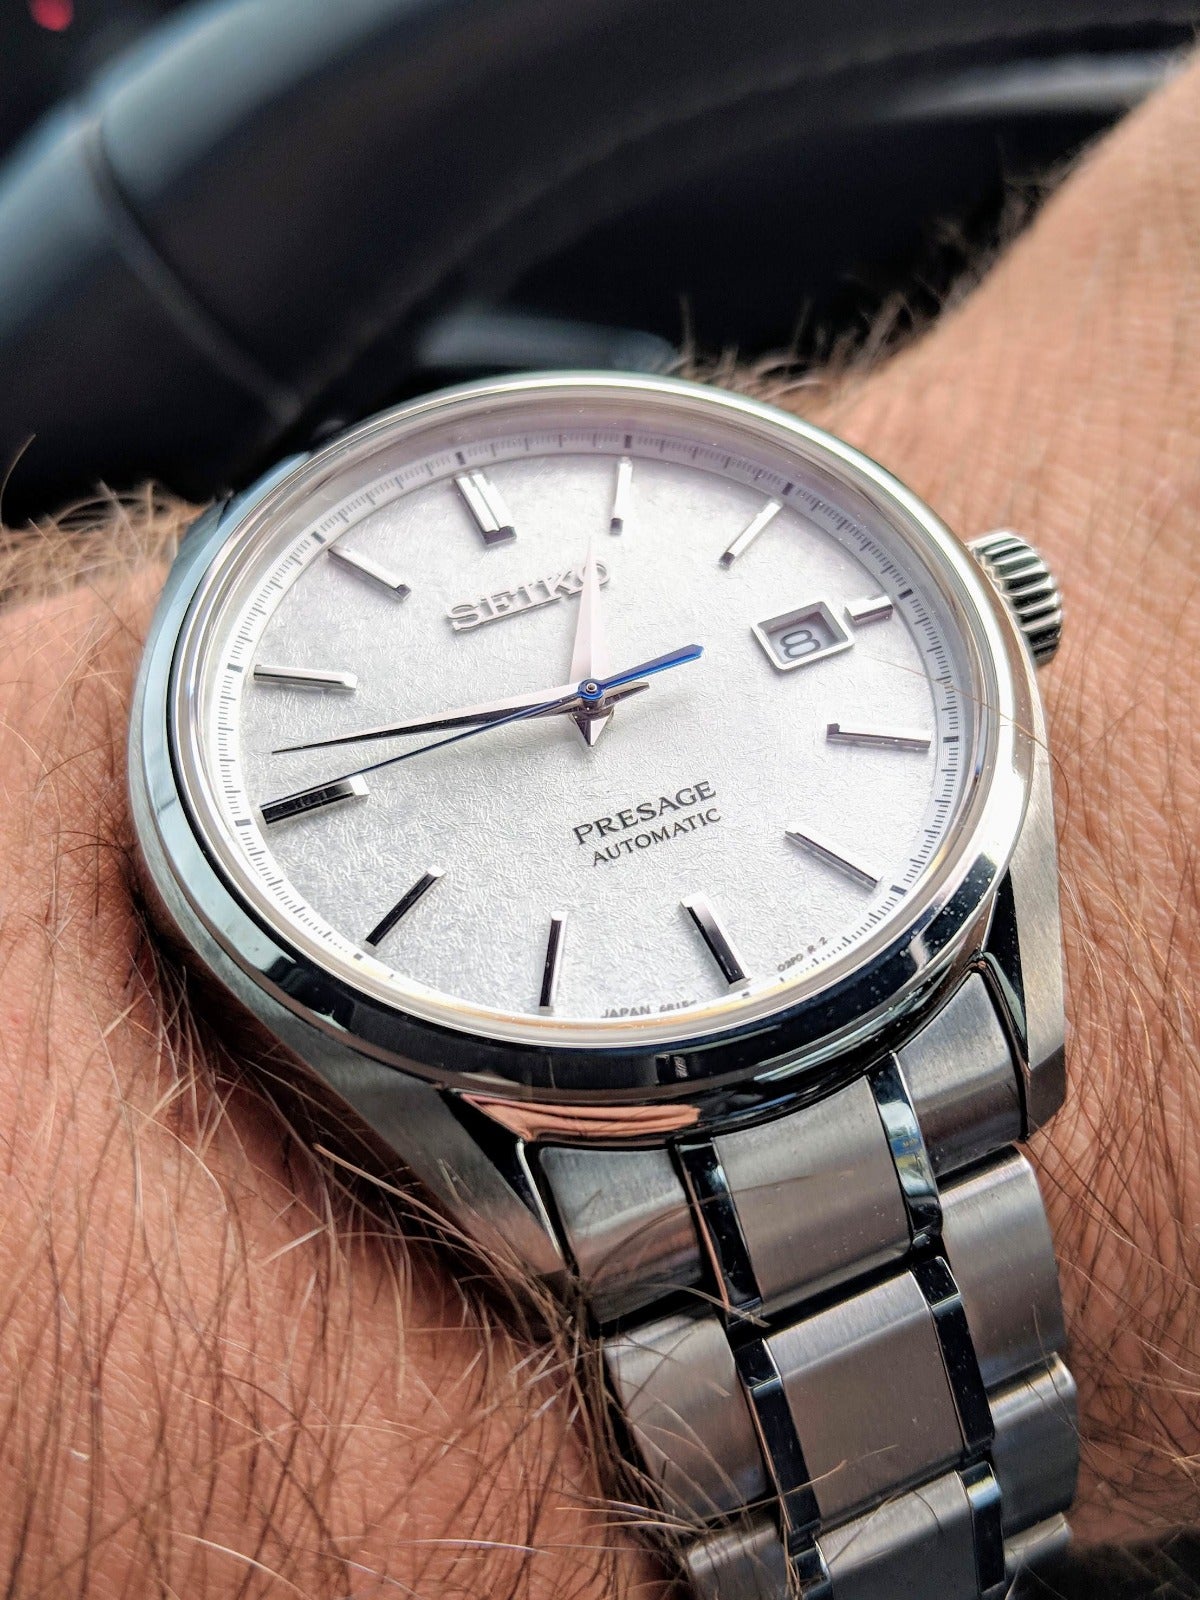 Looking to spend $1k on a watch. Looking at the Seiko SARX055. Anything ...